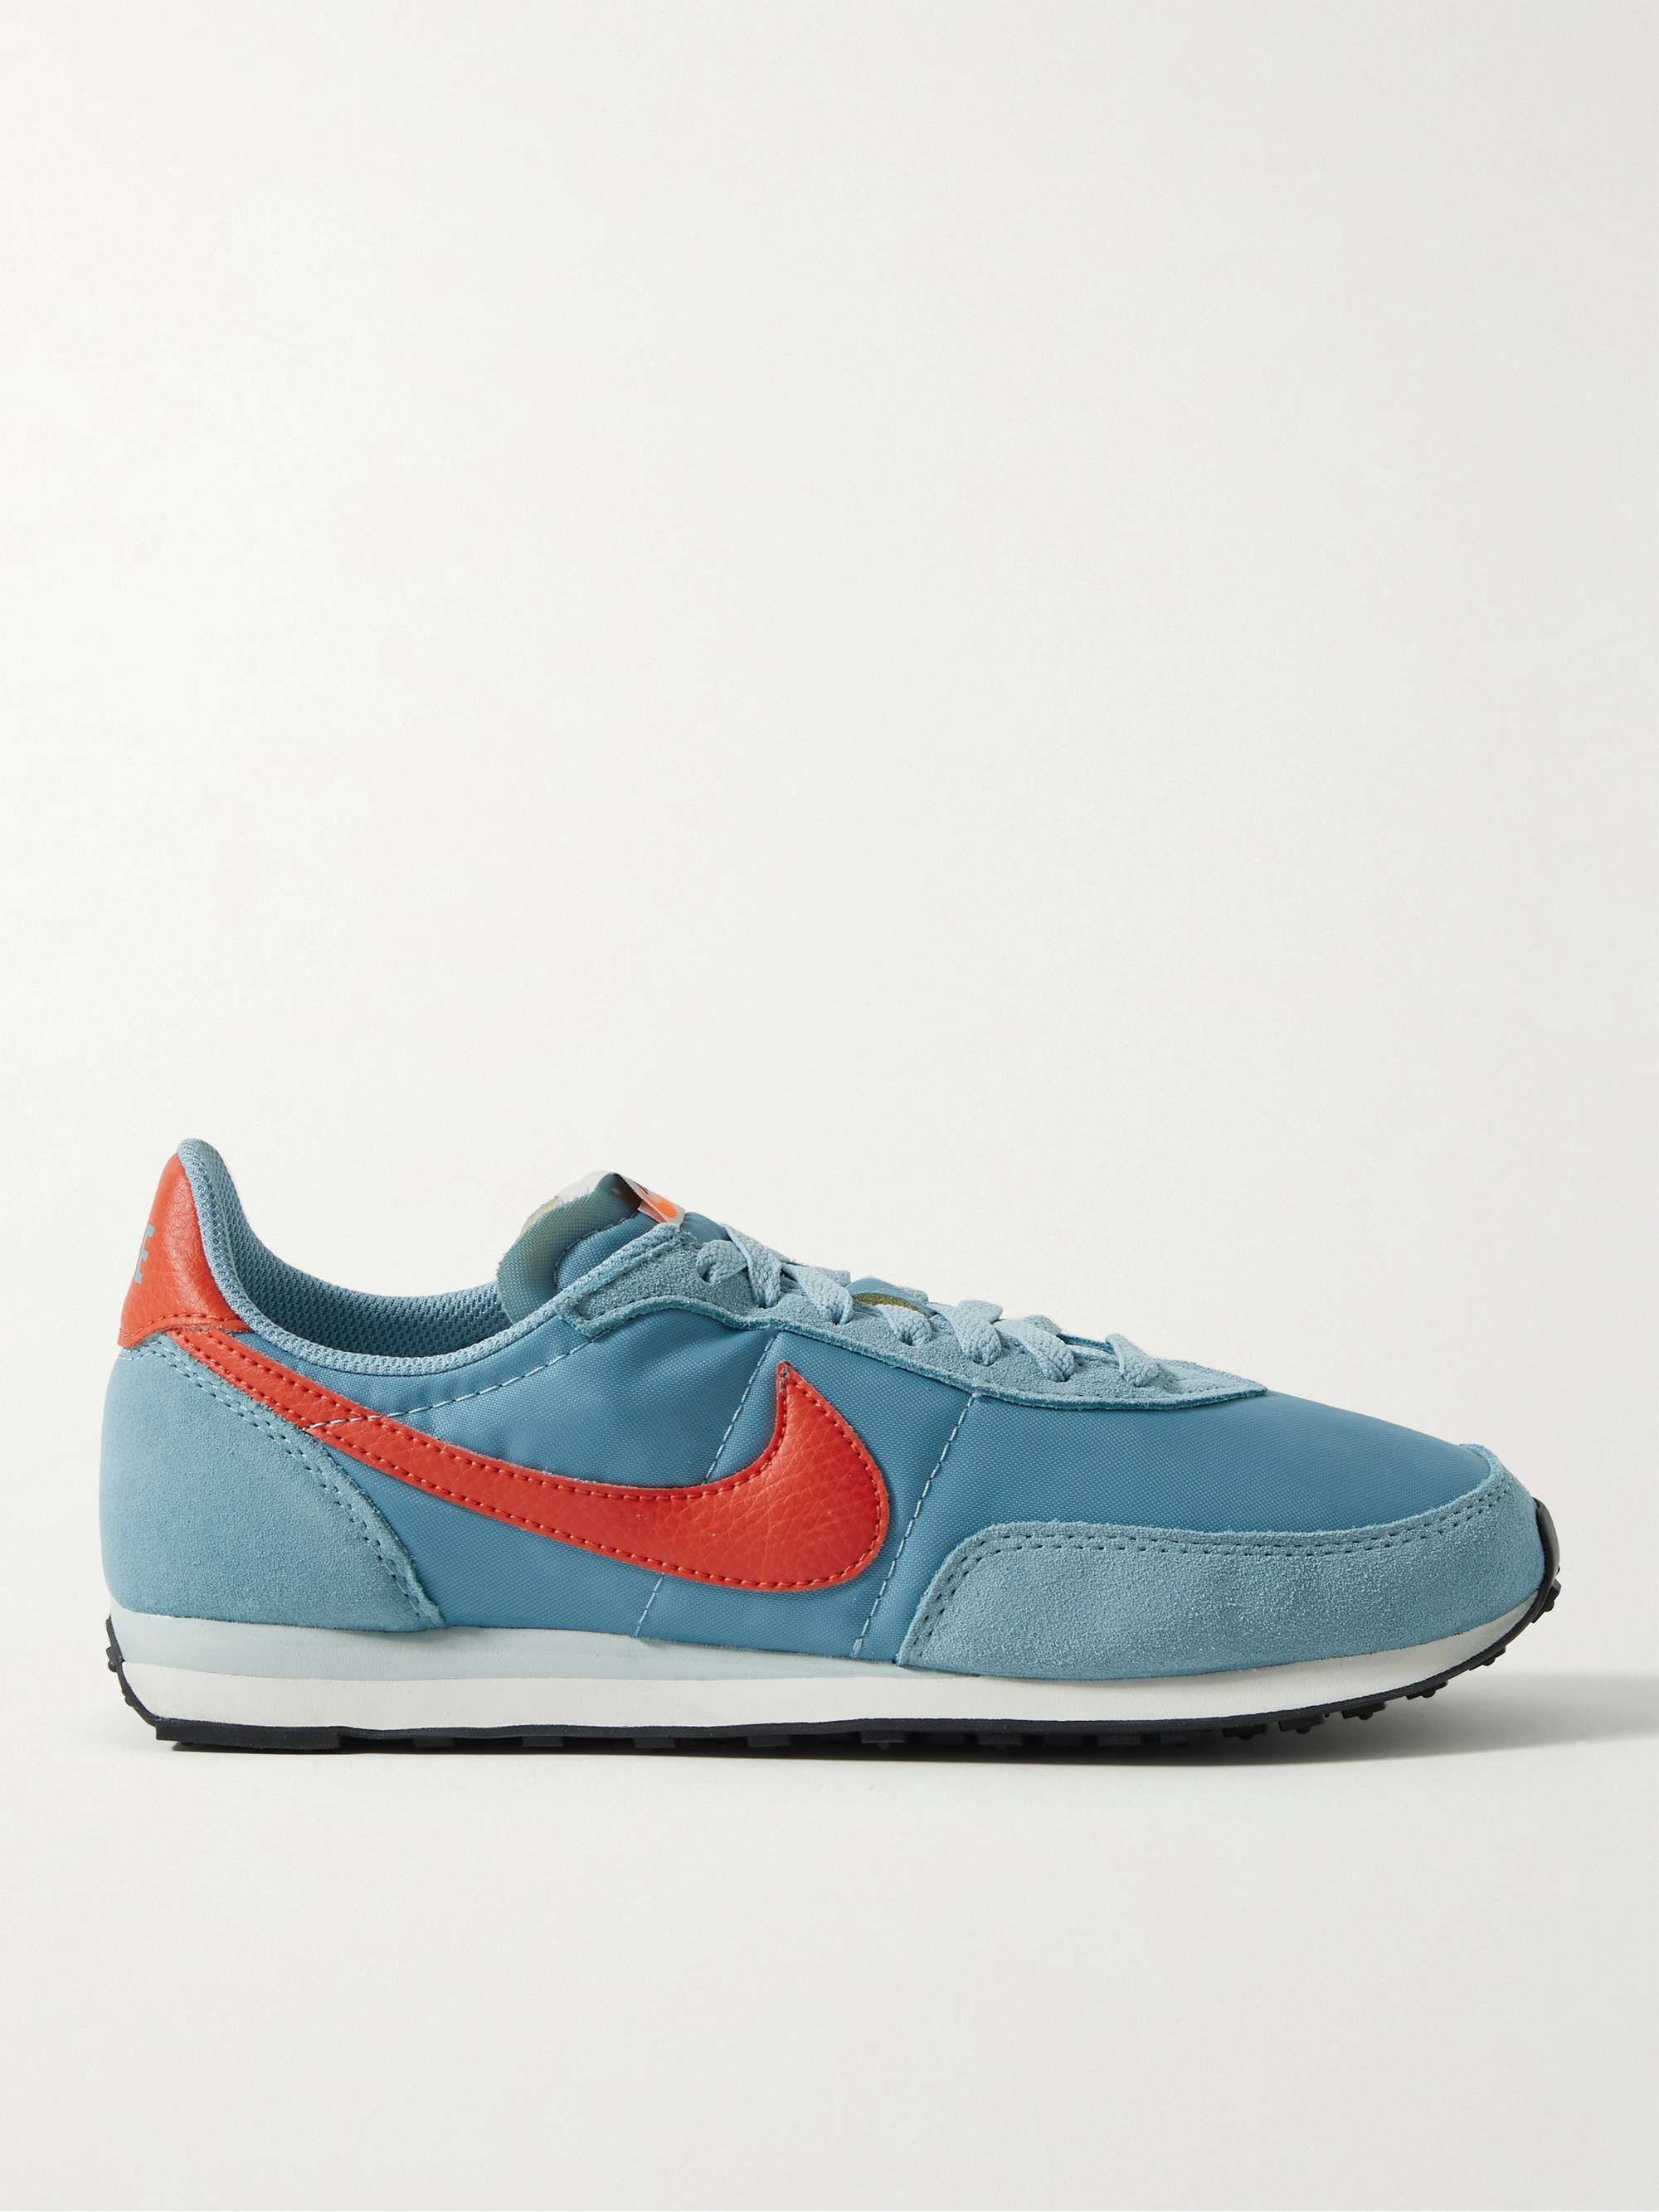 NIKE Waffle 2 SP Leather and Suede-Trimmed Nylon Sneakers